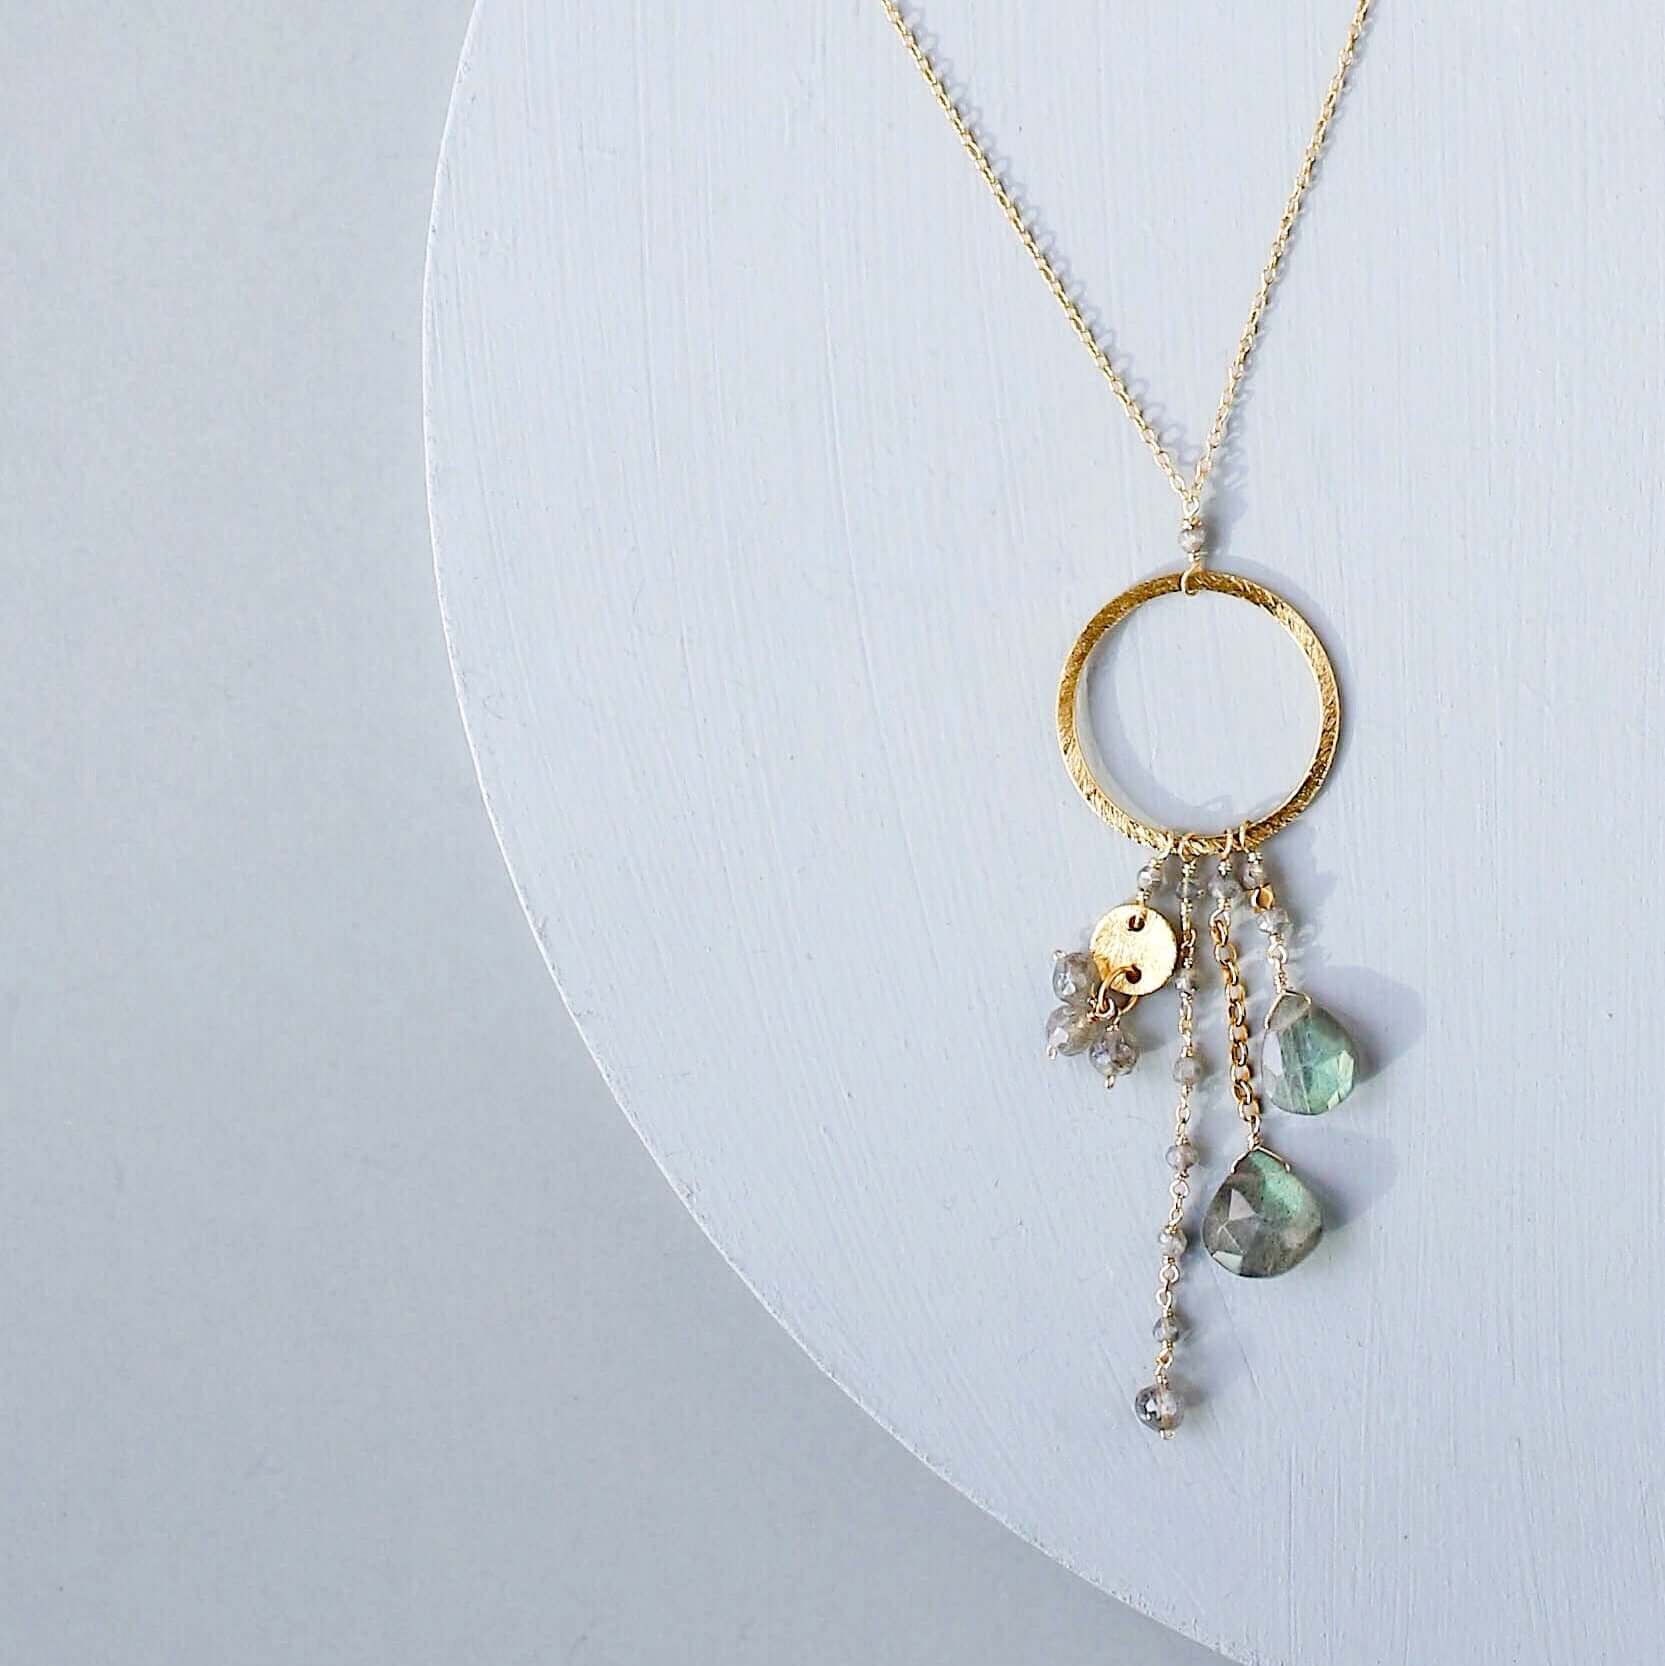 Multiple strands of lush gems sparkle on a hoop with labradorite gemstone Pendant Gold Necklace